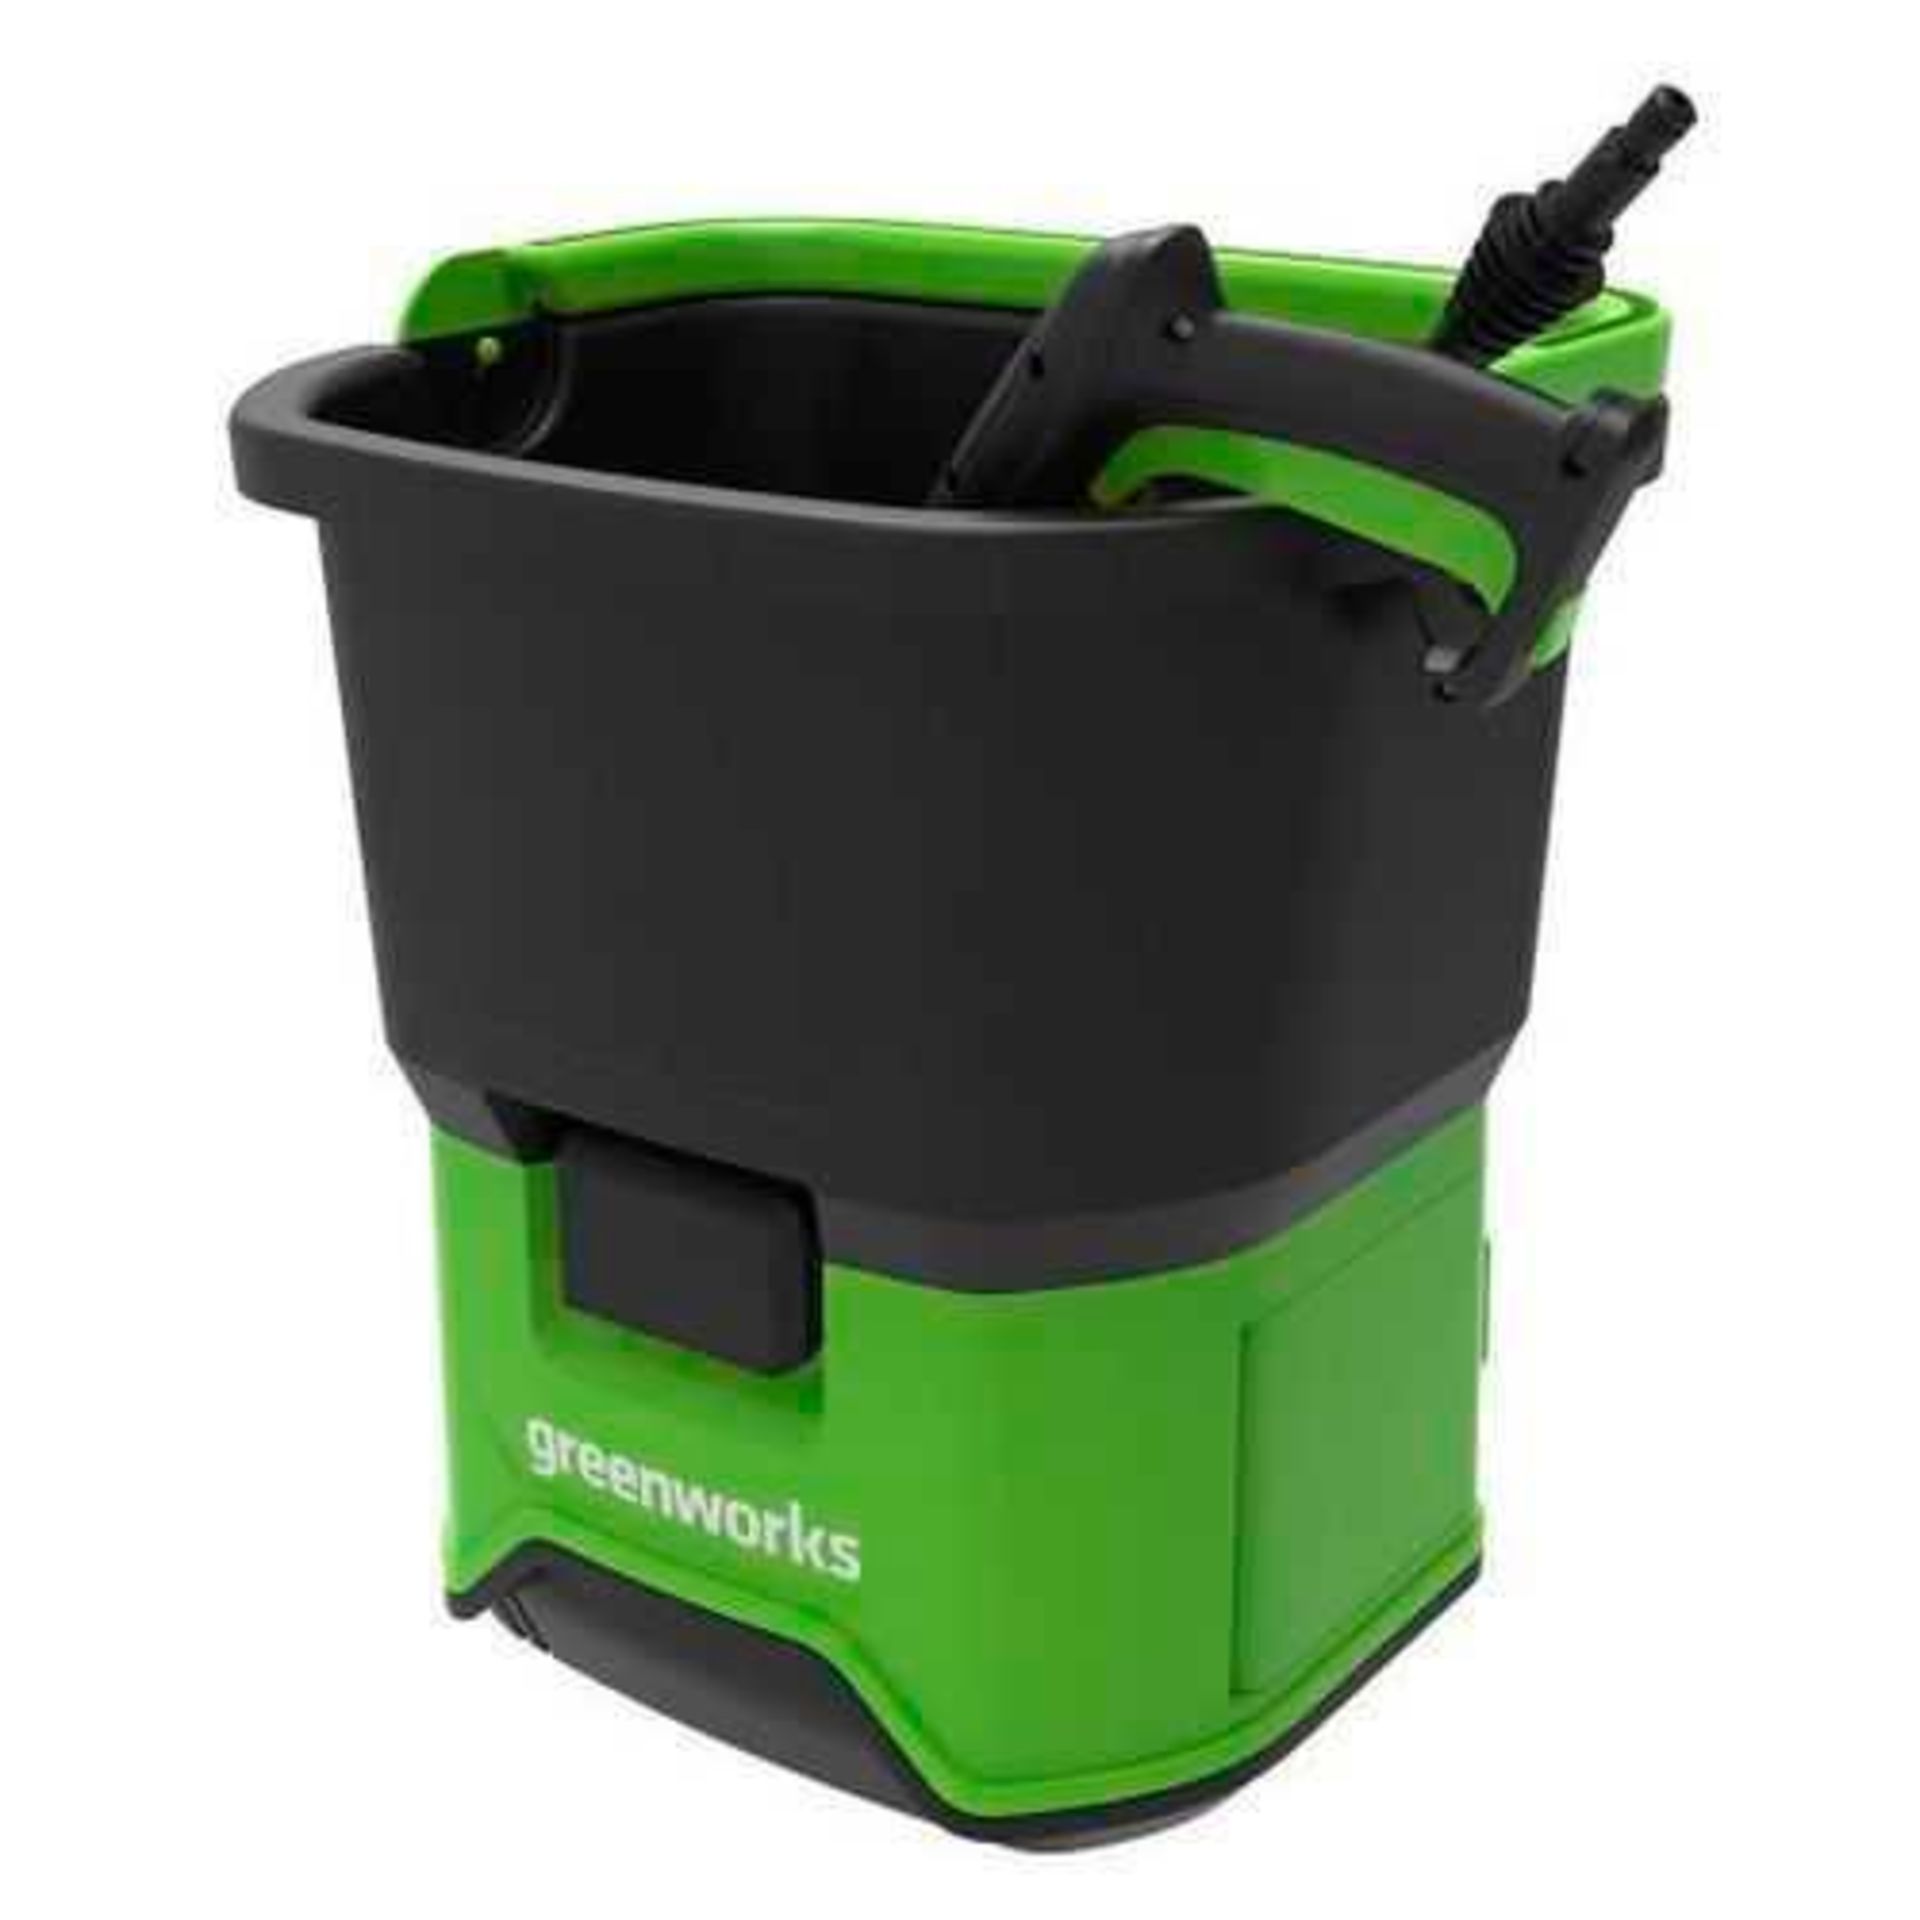 Rrp £140 Boxed Greenworks High Pressure Washer - Image 2 of 2